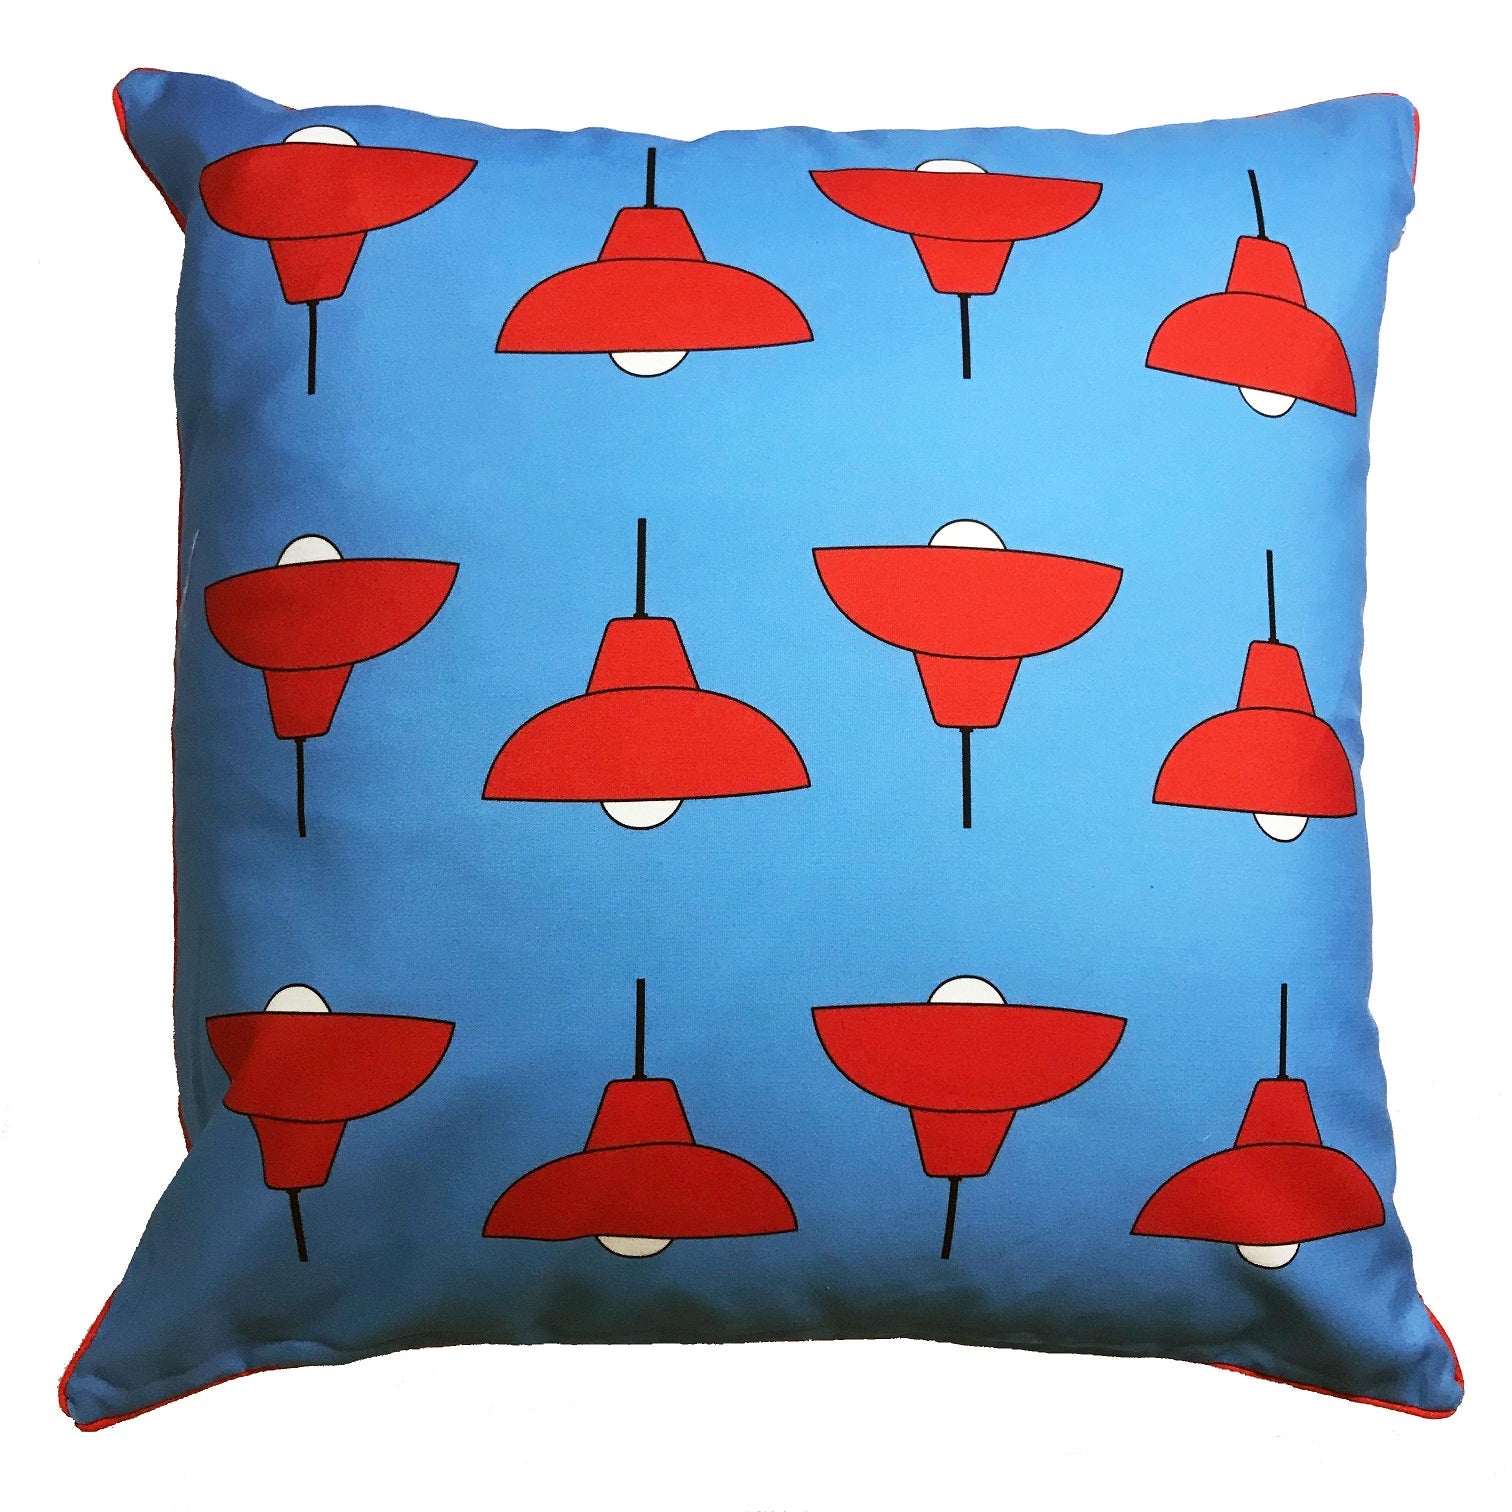 Java Road Lamps Cushion Cover by Liz Fry Design